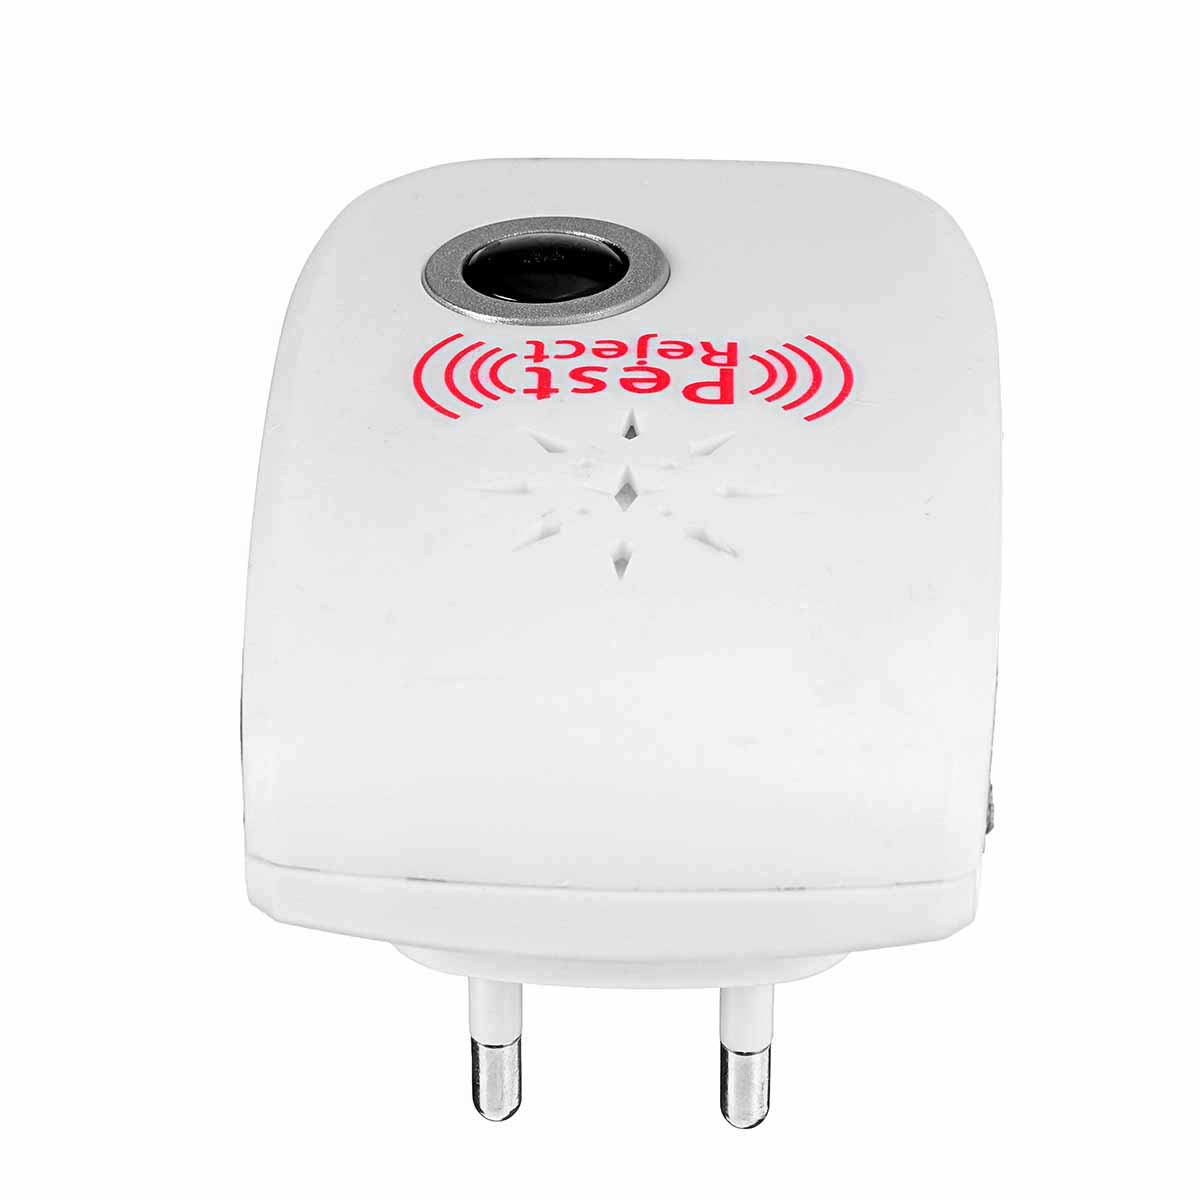 Ultrasonic-Mosquito-Repellent-Mosquito-Double-Horn-Mouse-Cockroach-Flea-Killer-1851125-11